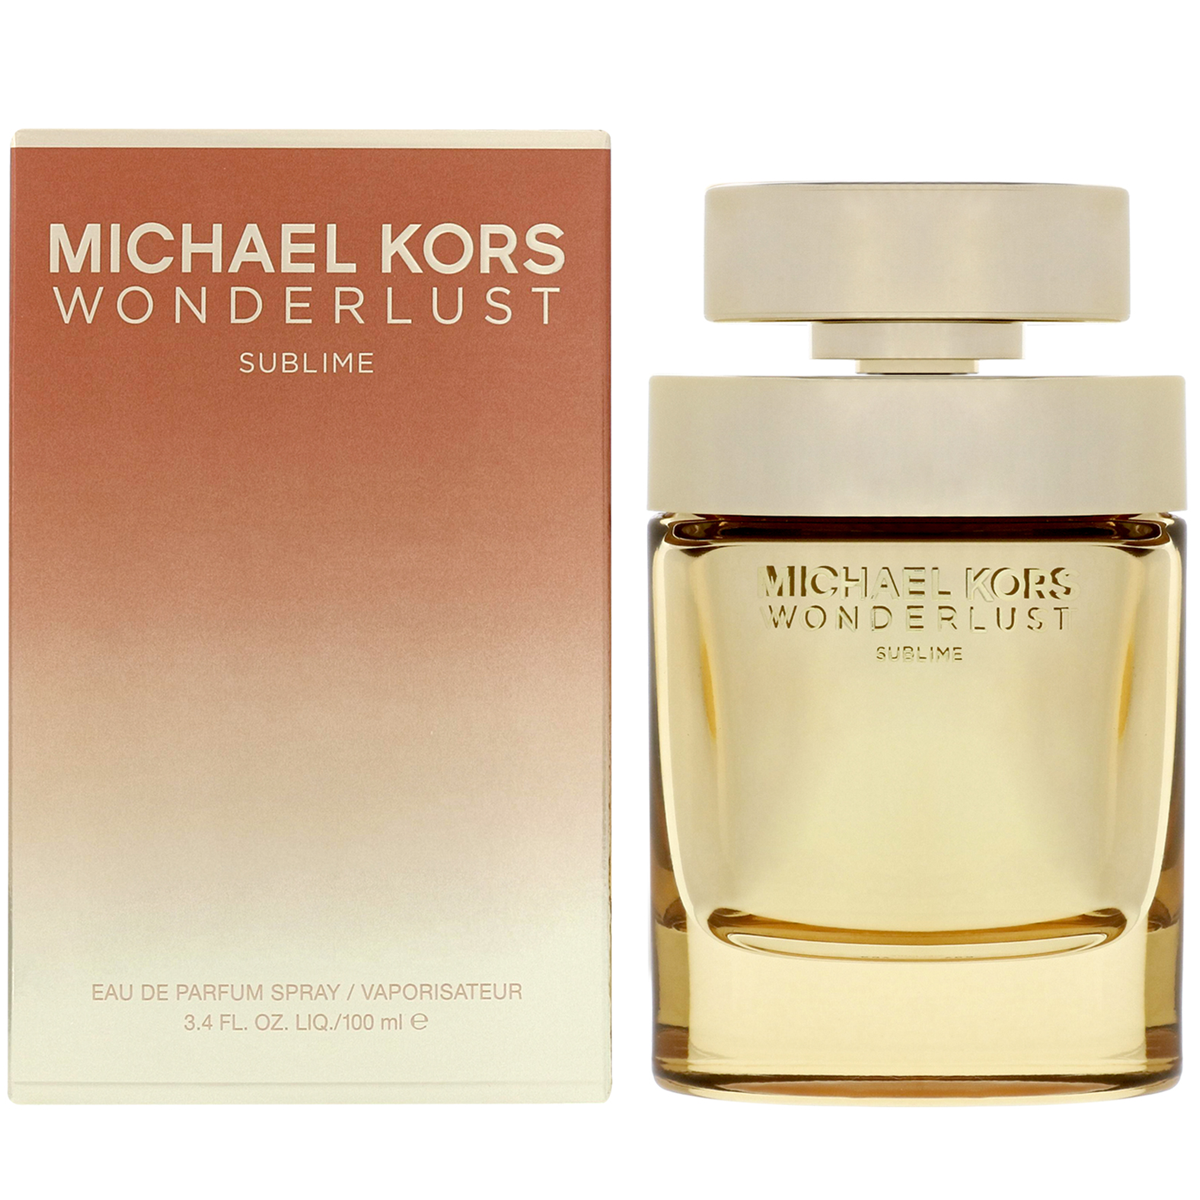 <span data-mce-fragment="1">Introducing Michael Kors Wonderlust Sublime, introduced in 2019, a radiant new fragrance evoking the time of day when sunlight turns magical. A sultry blend of tiare and orange flowers are mingled with rich oriental notes for a sumptuous warmth that captures the sun’s rays.</span>